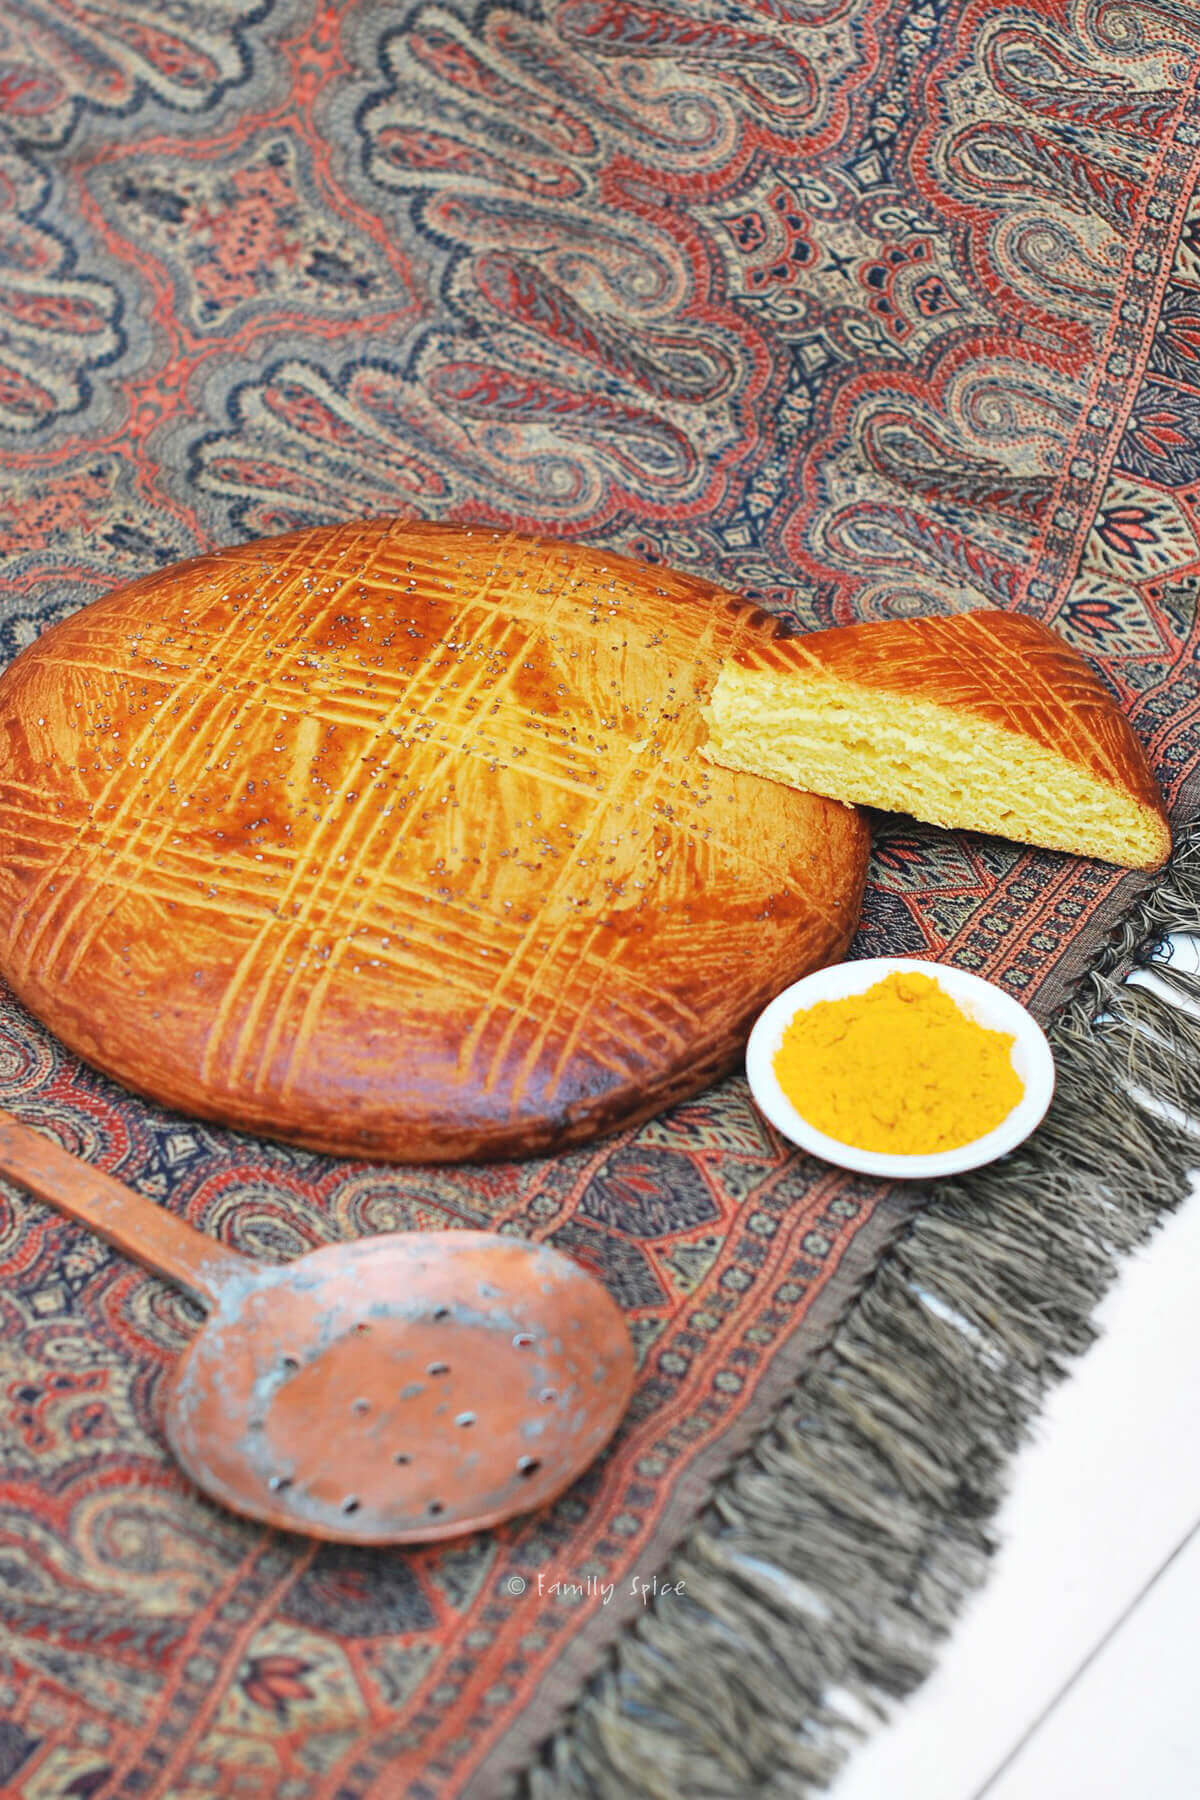 Freshly baked shirin chorek (sweet Persian bread) with a wedge slice next to it